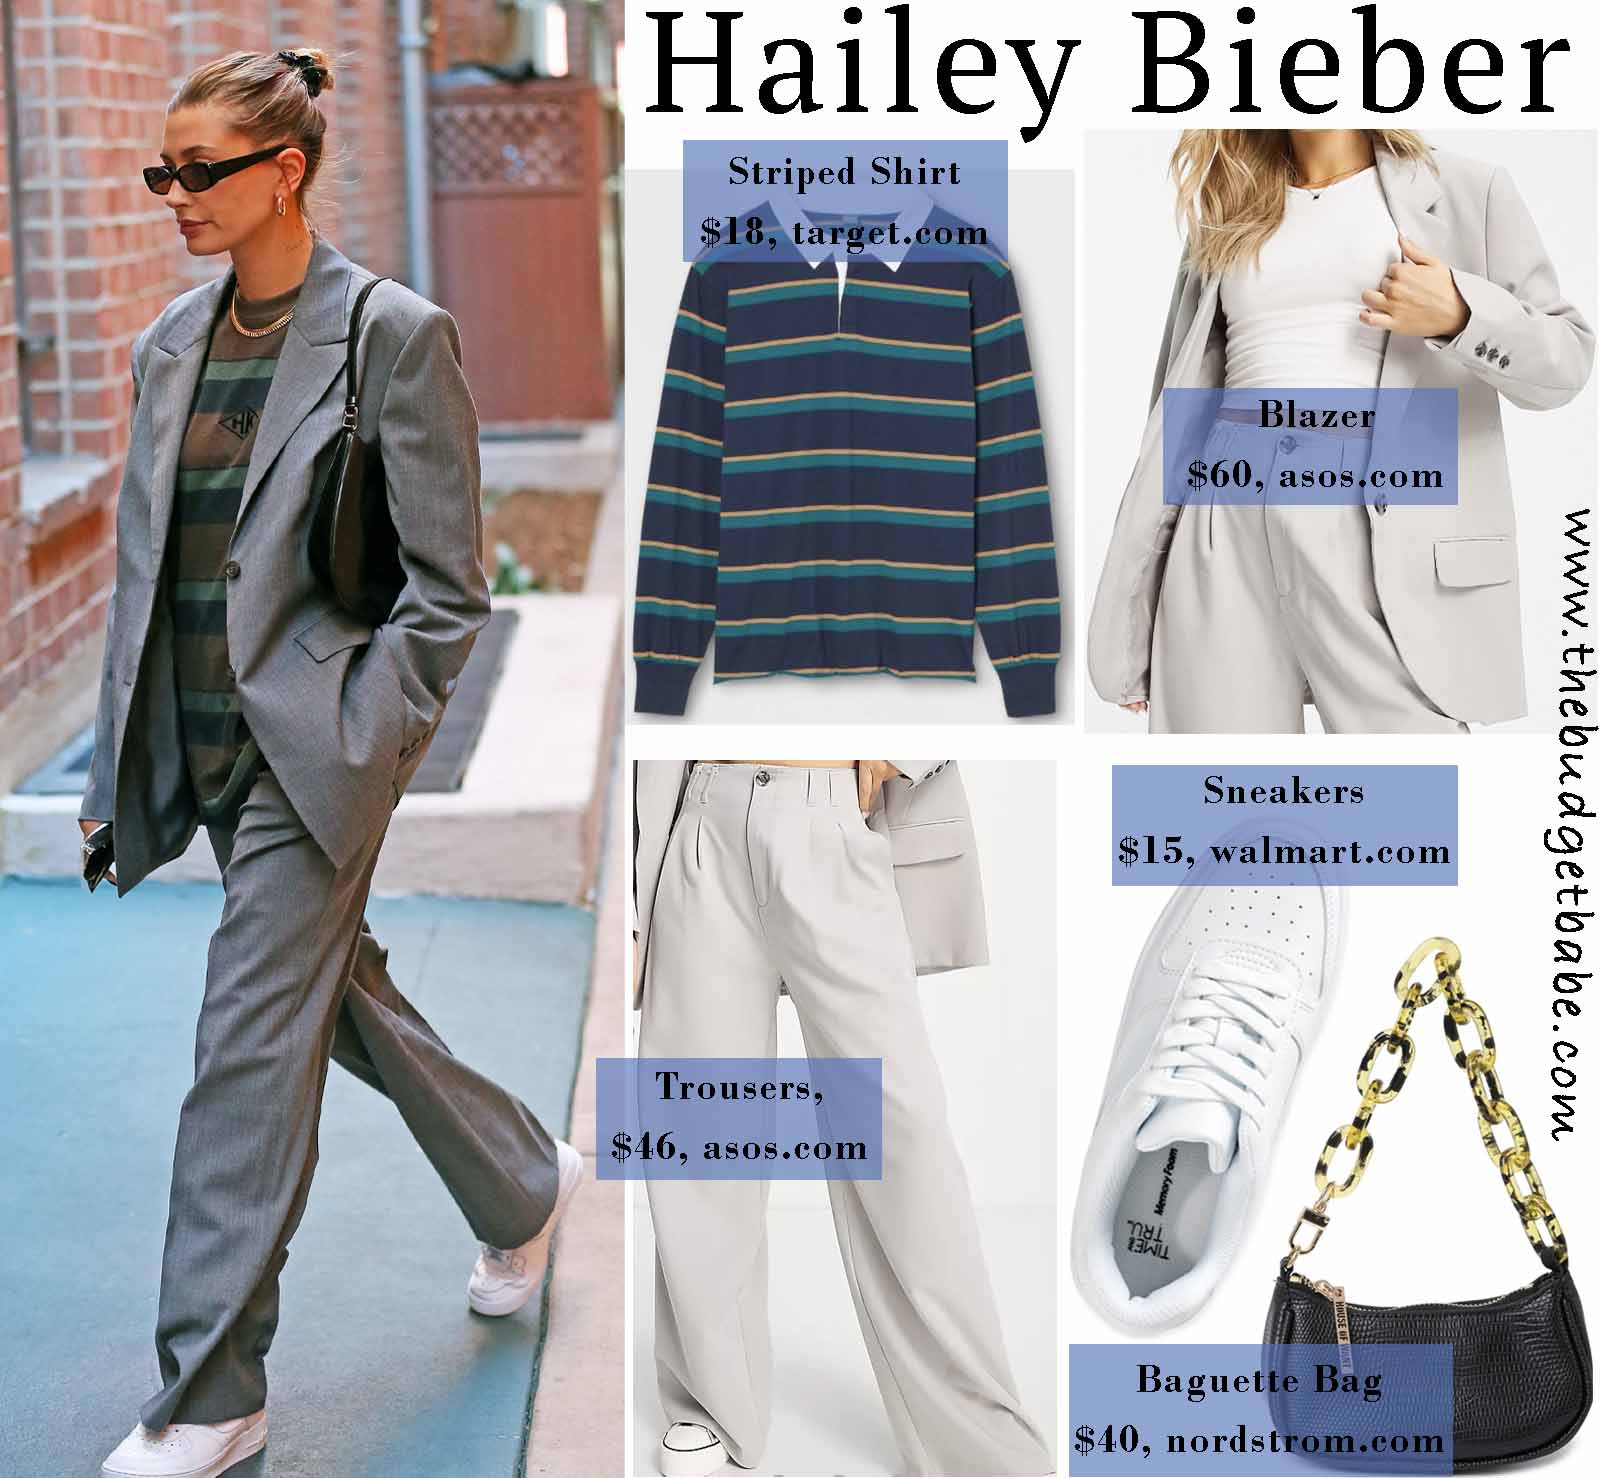 Hailey's suit style